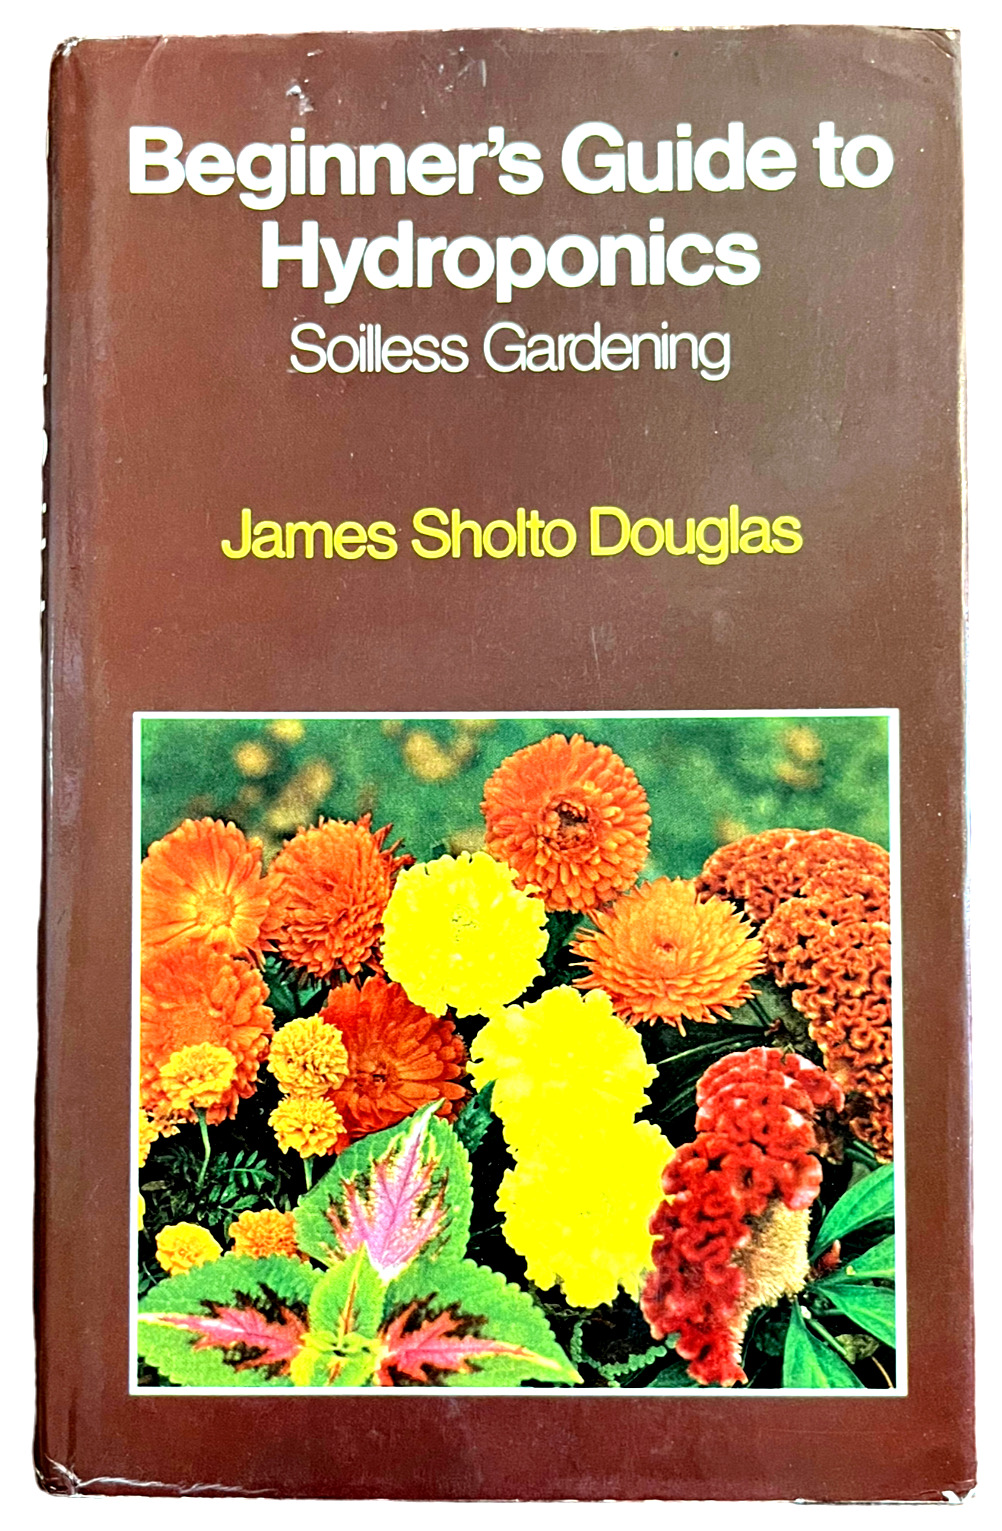 Beginner\'s Guide to Hydroponics: Soilless Gardening by James Sholto Douglas - HC